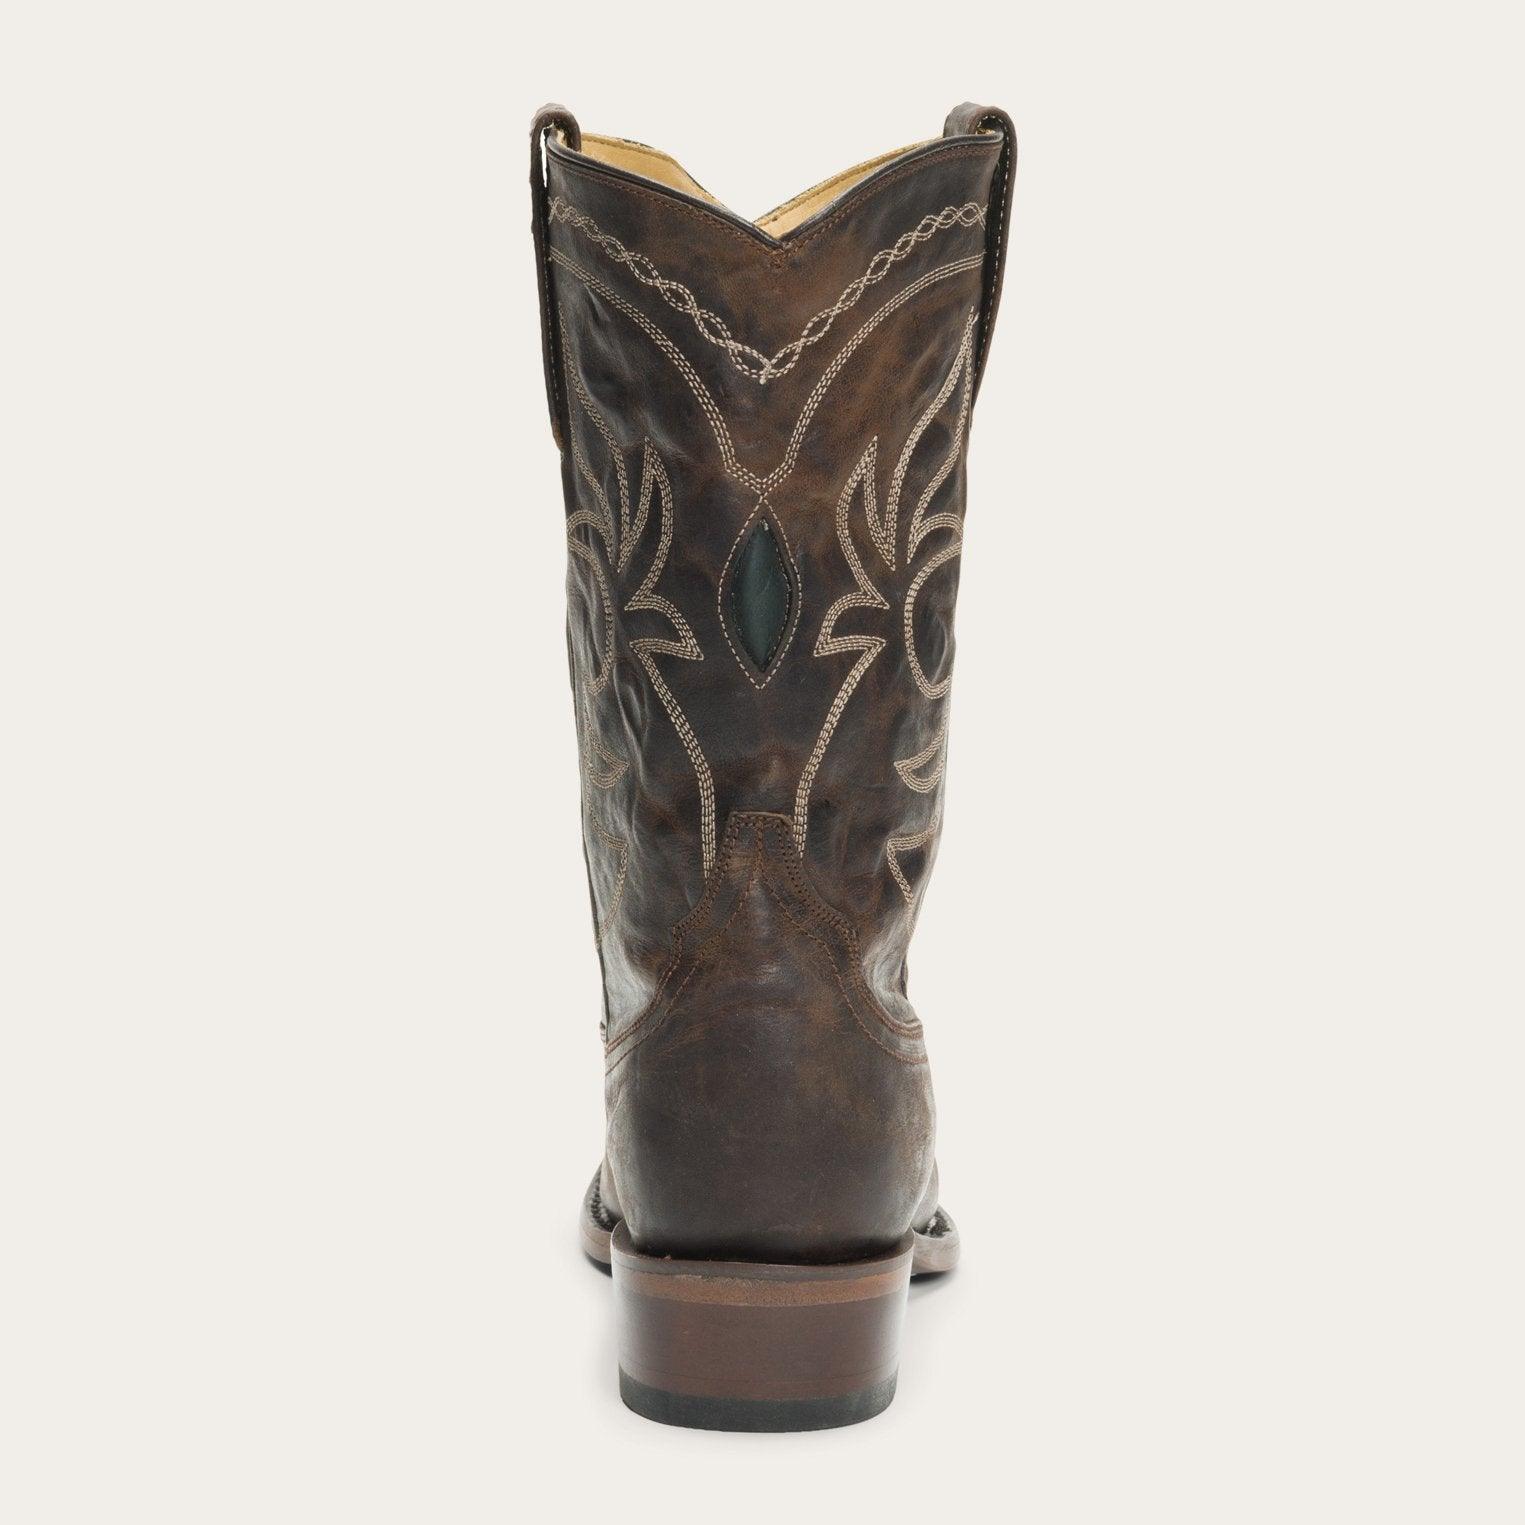 Stetson Iris Mid-Calf Embroidered Boot - Flyclothing LLC